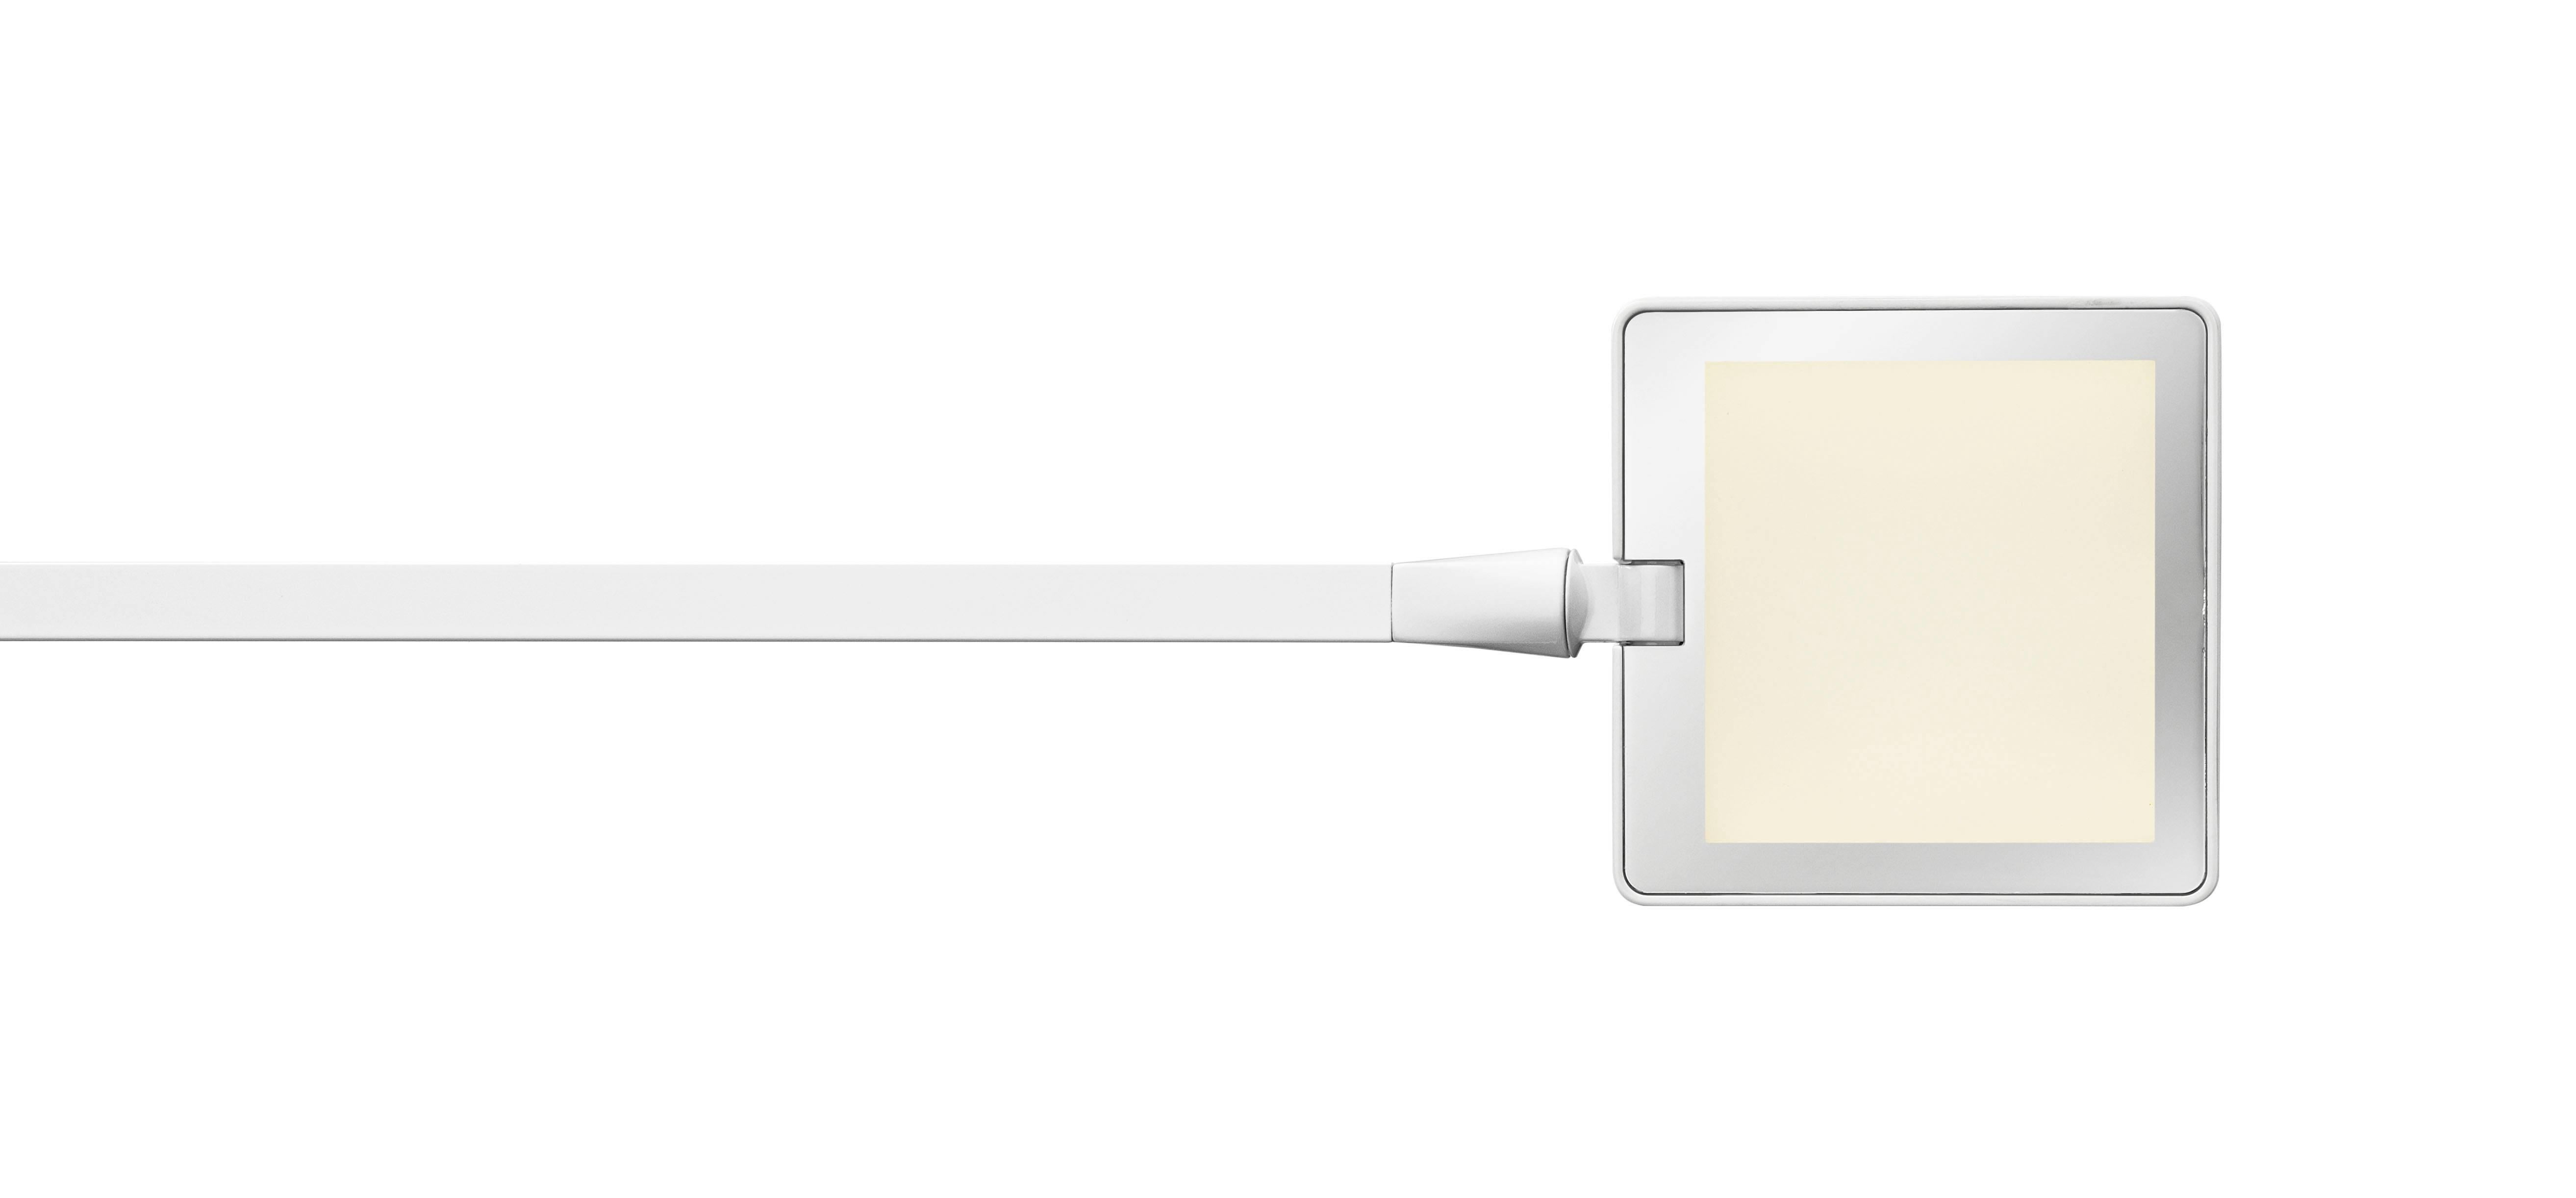 The newest addition to the popular Kelvin LED family , the Kelvin Edge offers the innovation and sleek design of the collection in a smaller package—without sacrificing output. Featuring the exclusive Edge Lighting Technology™ from which it takes